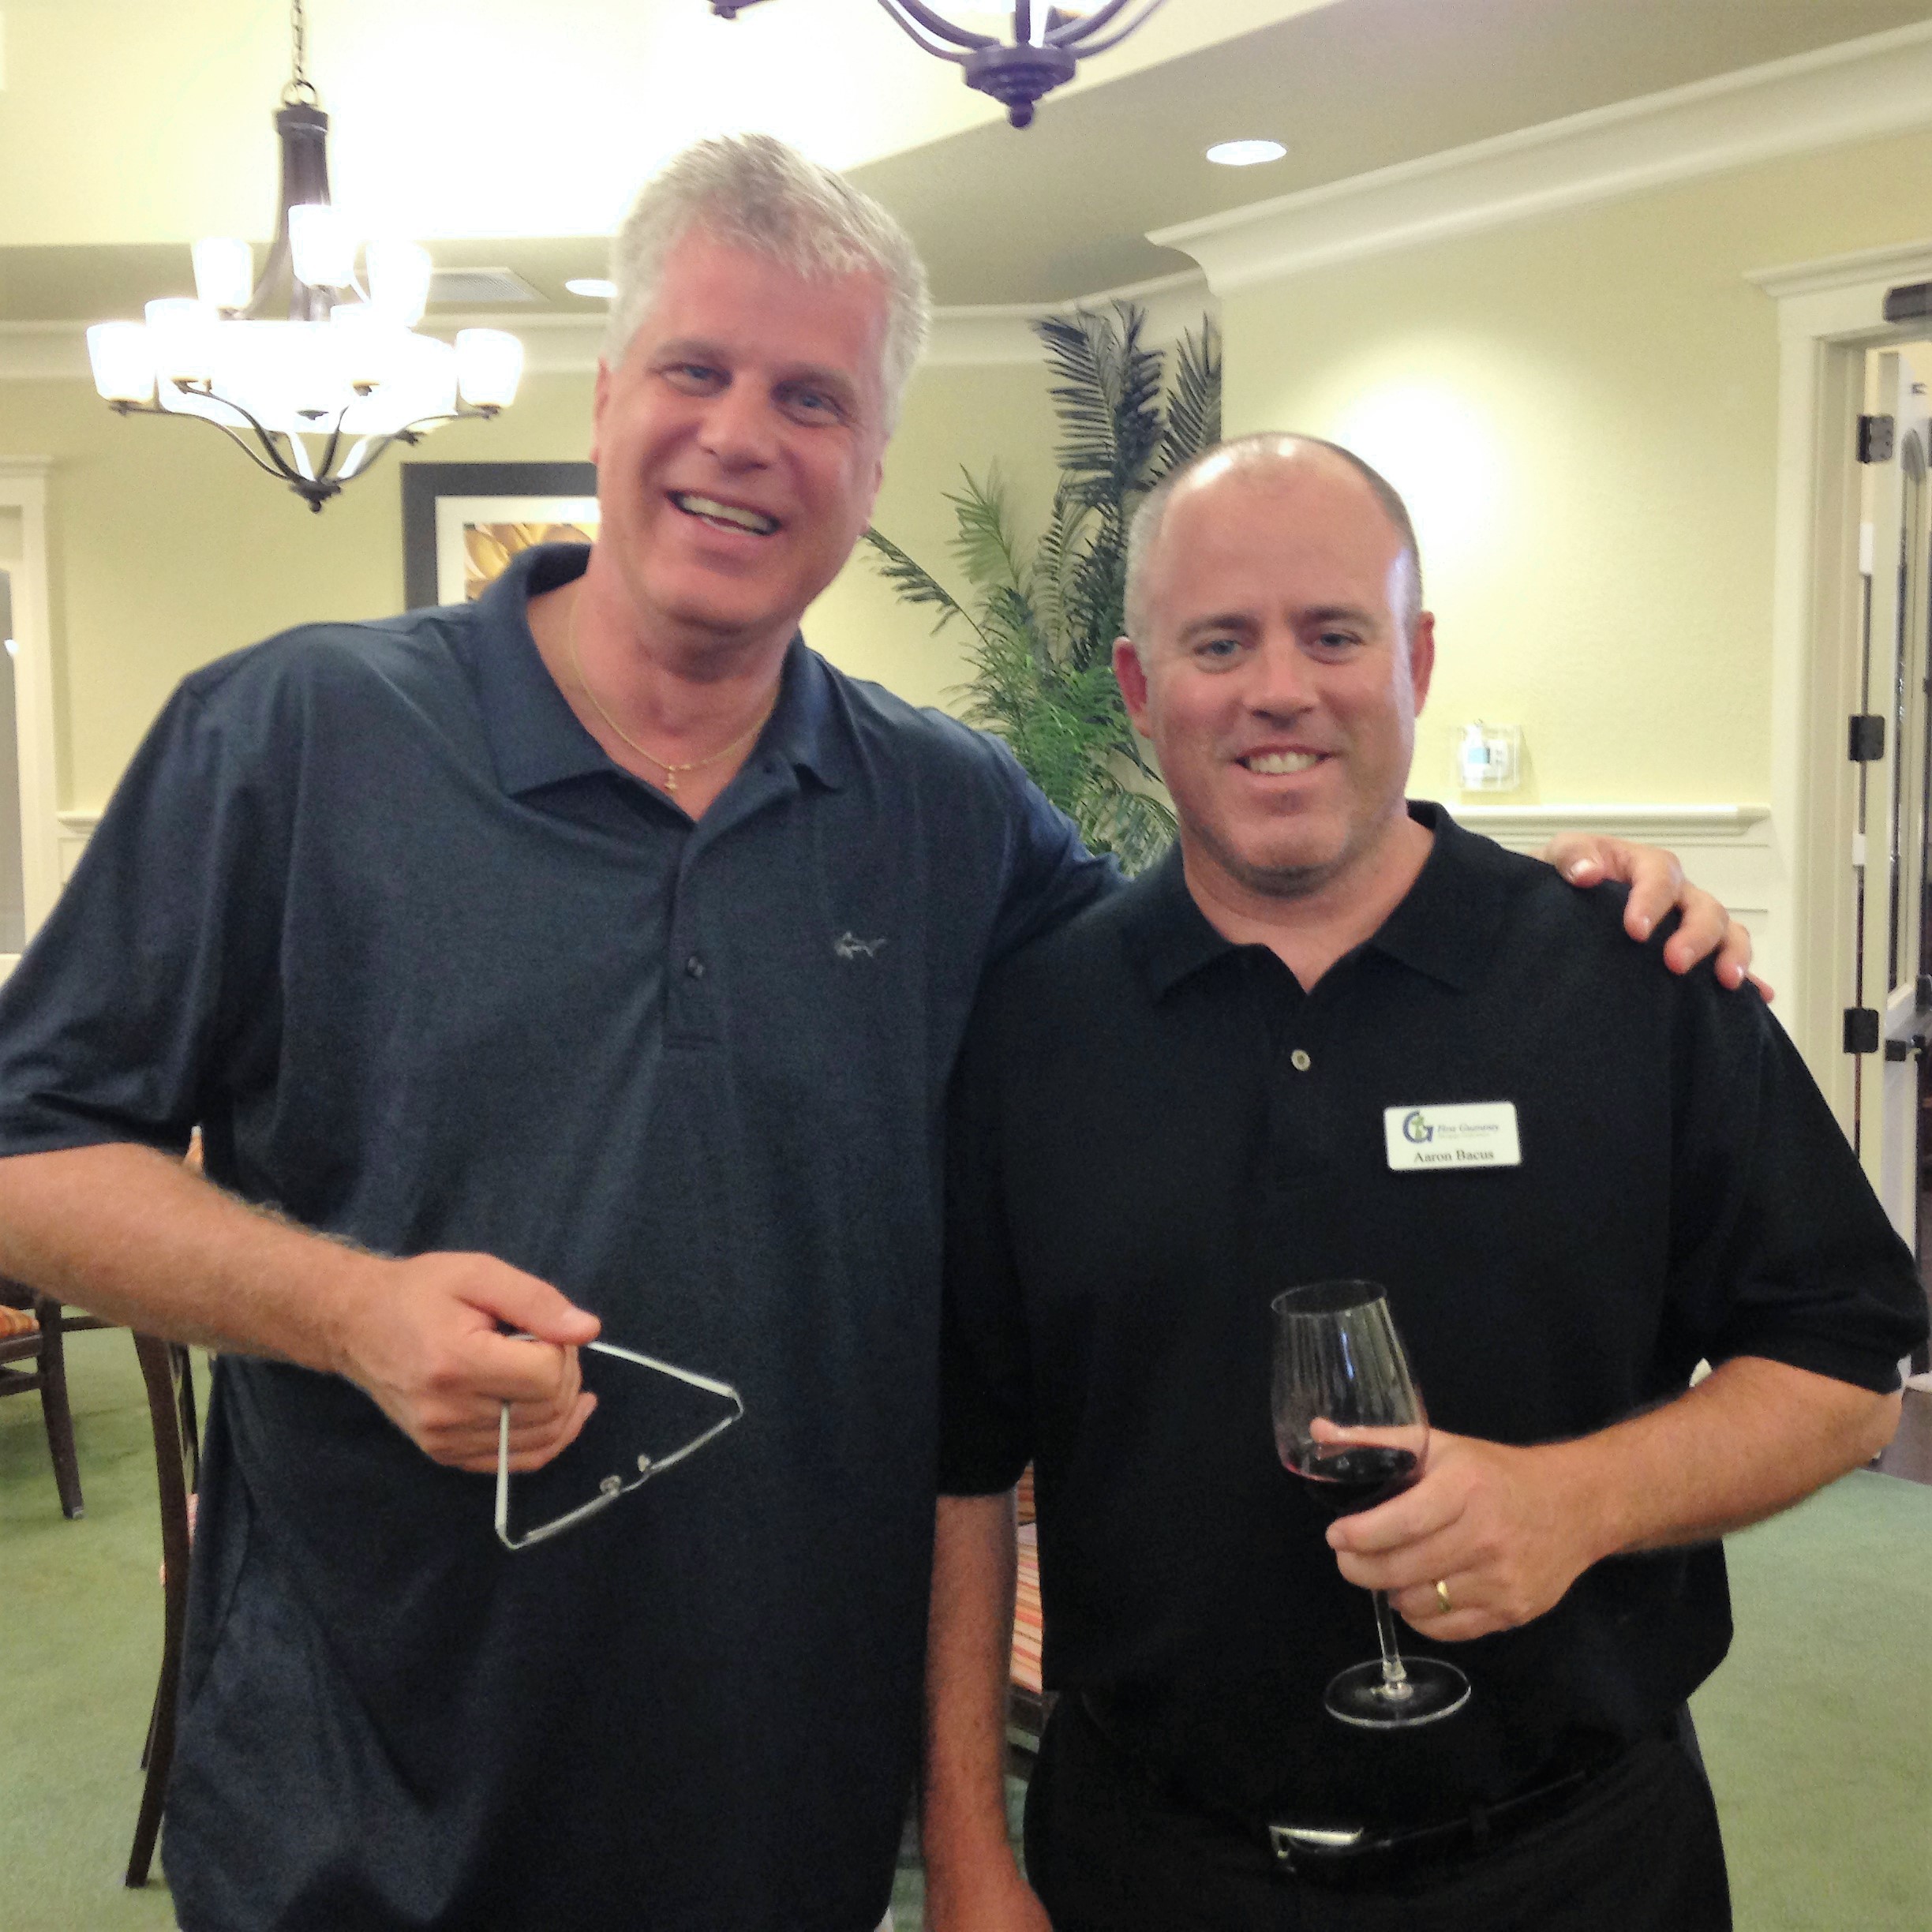 Eric Egolf of Watson Mortgage and Aaron Bacus of First Guaranty Mortgage